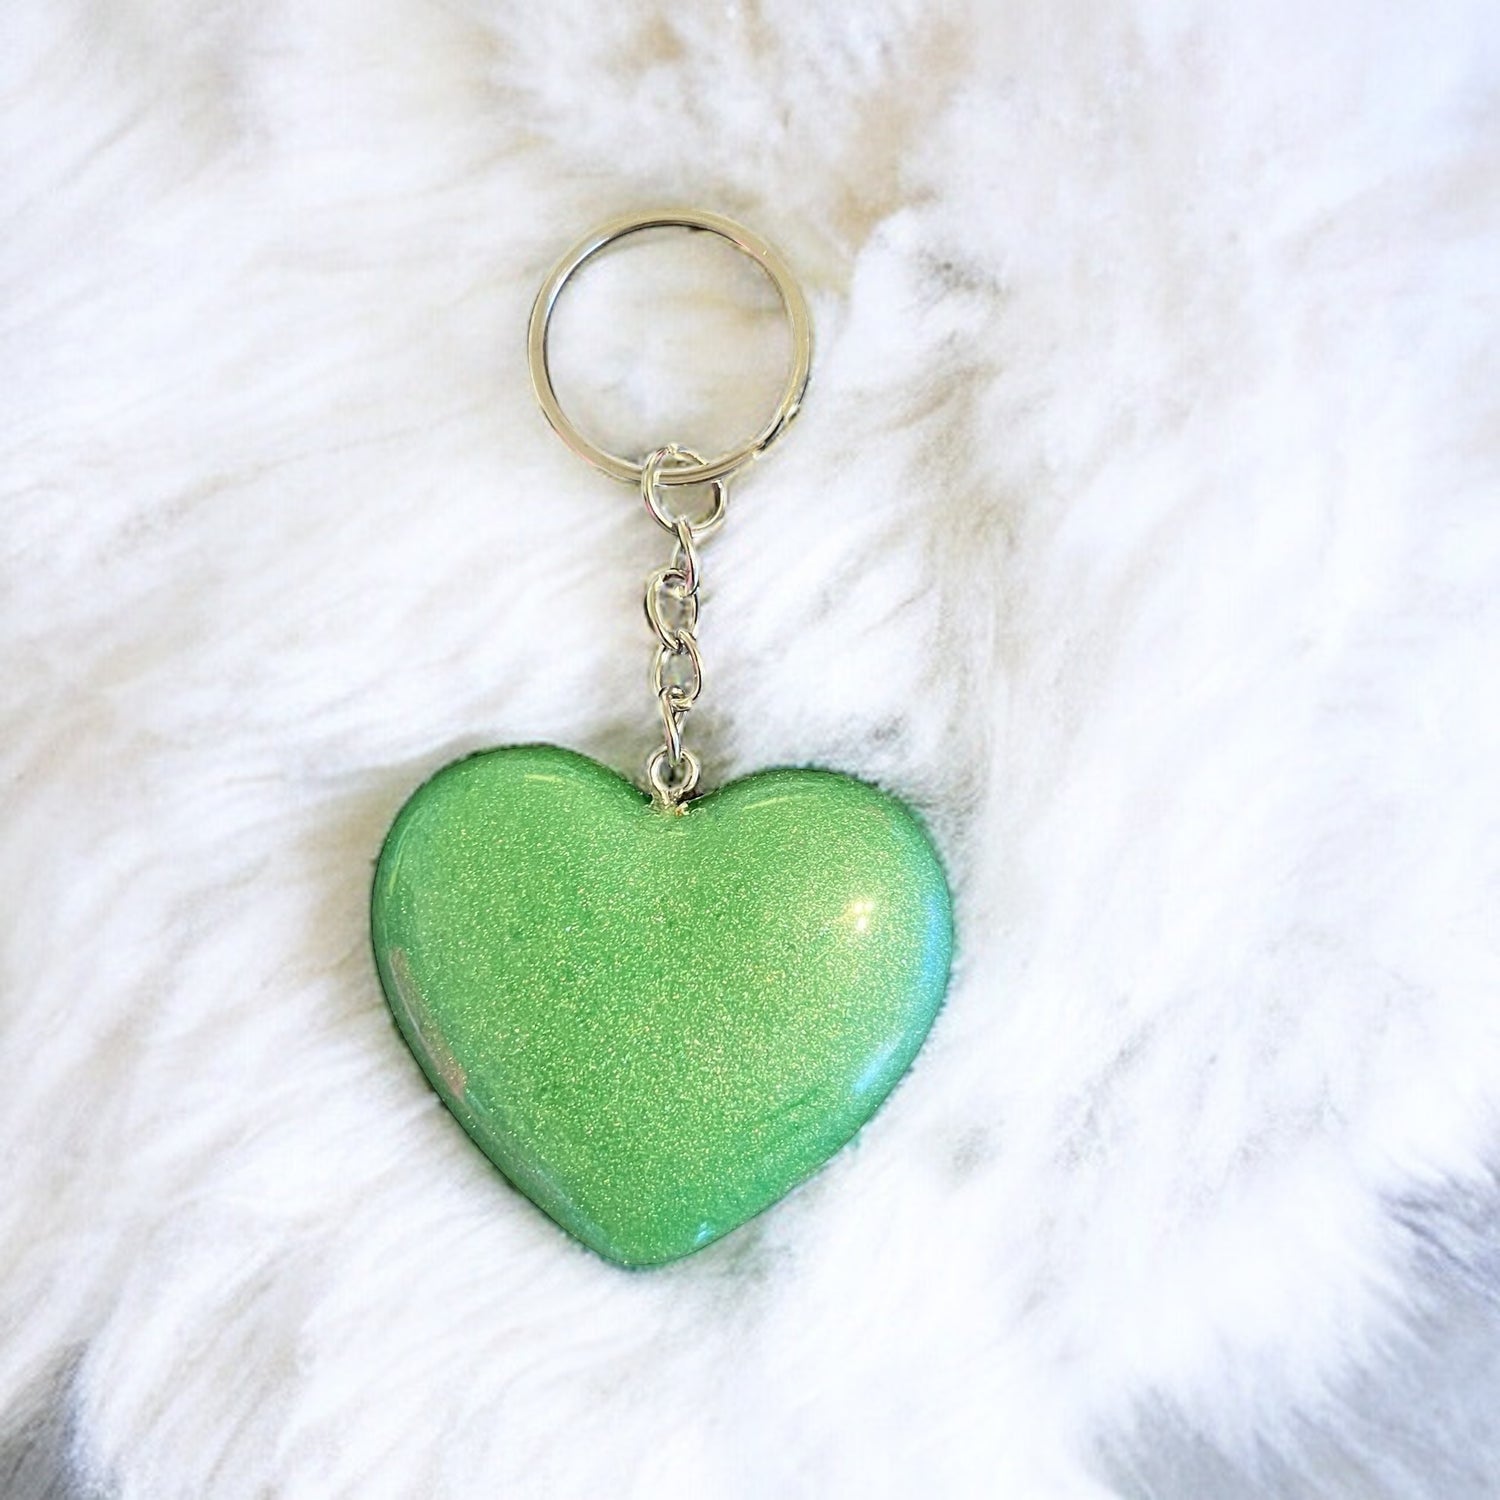 Shimmering Love Glam Hearts: JenDore Handmade Solid Green Glitter Sparkle Keychain with a grass bavkgroubd filled with small colored eggs